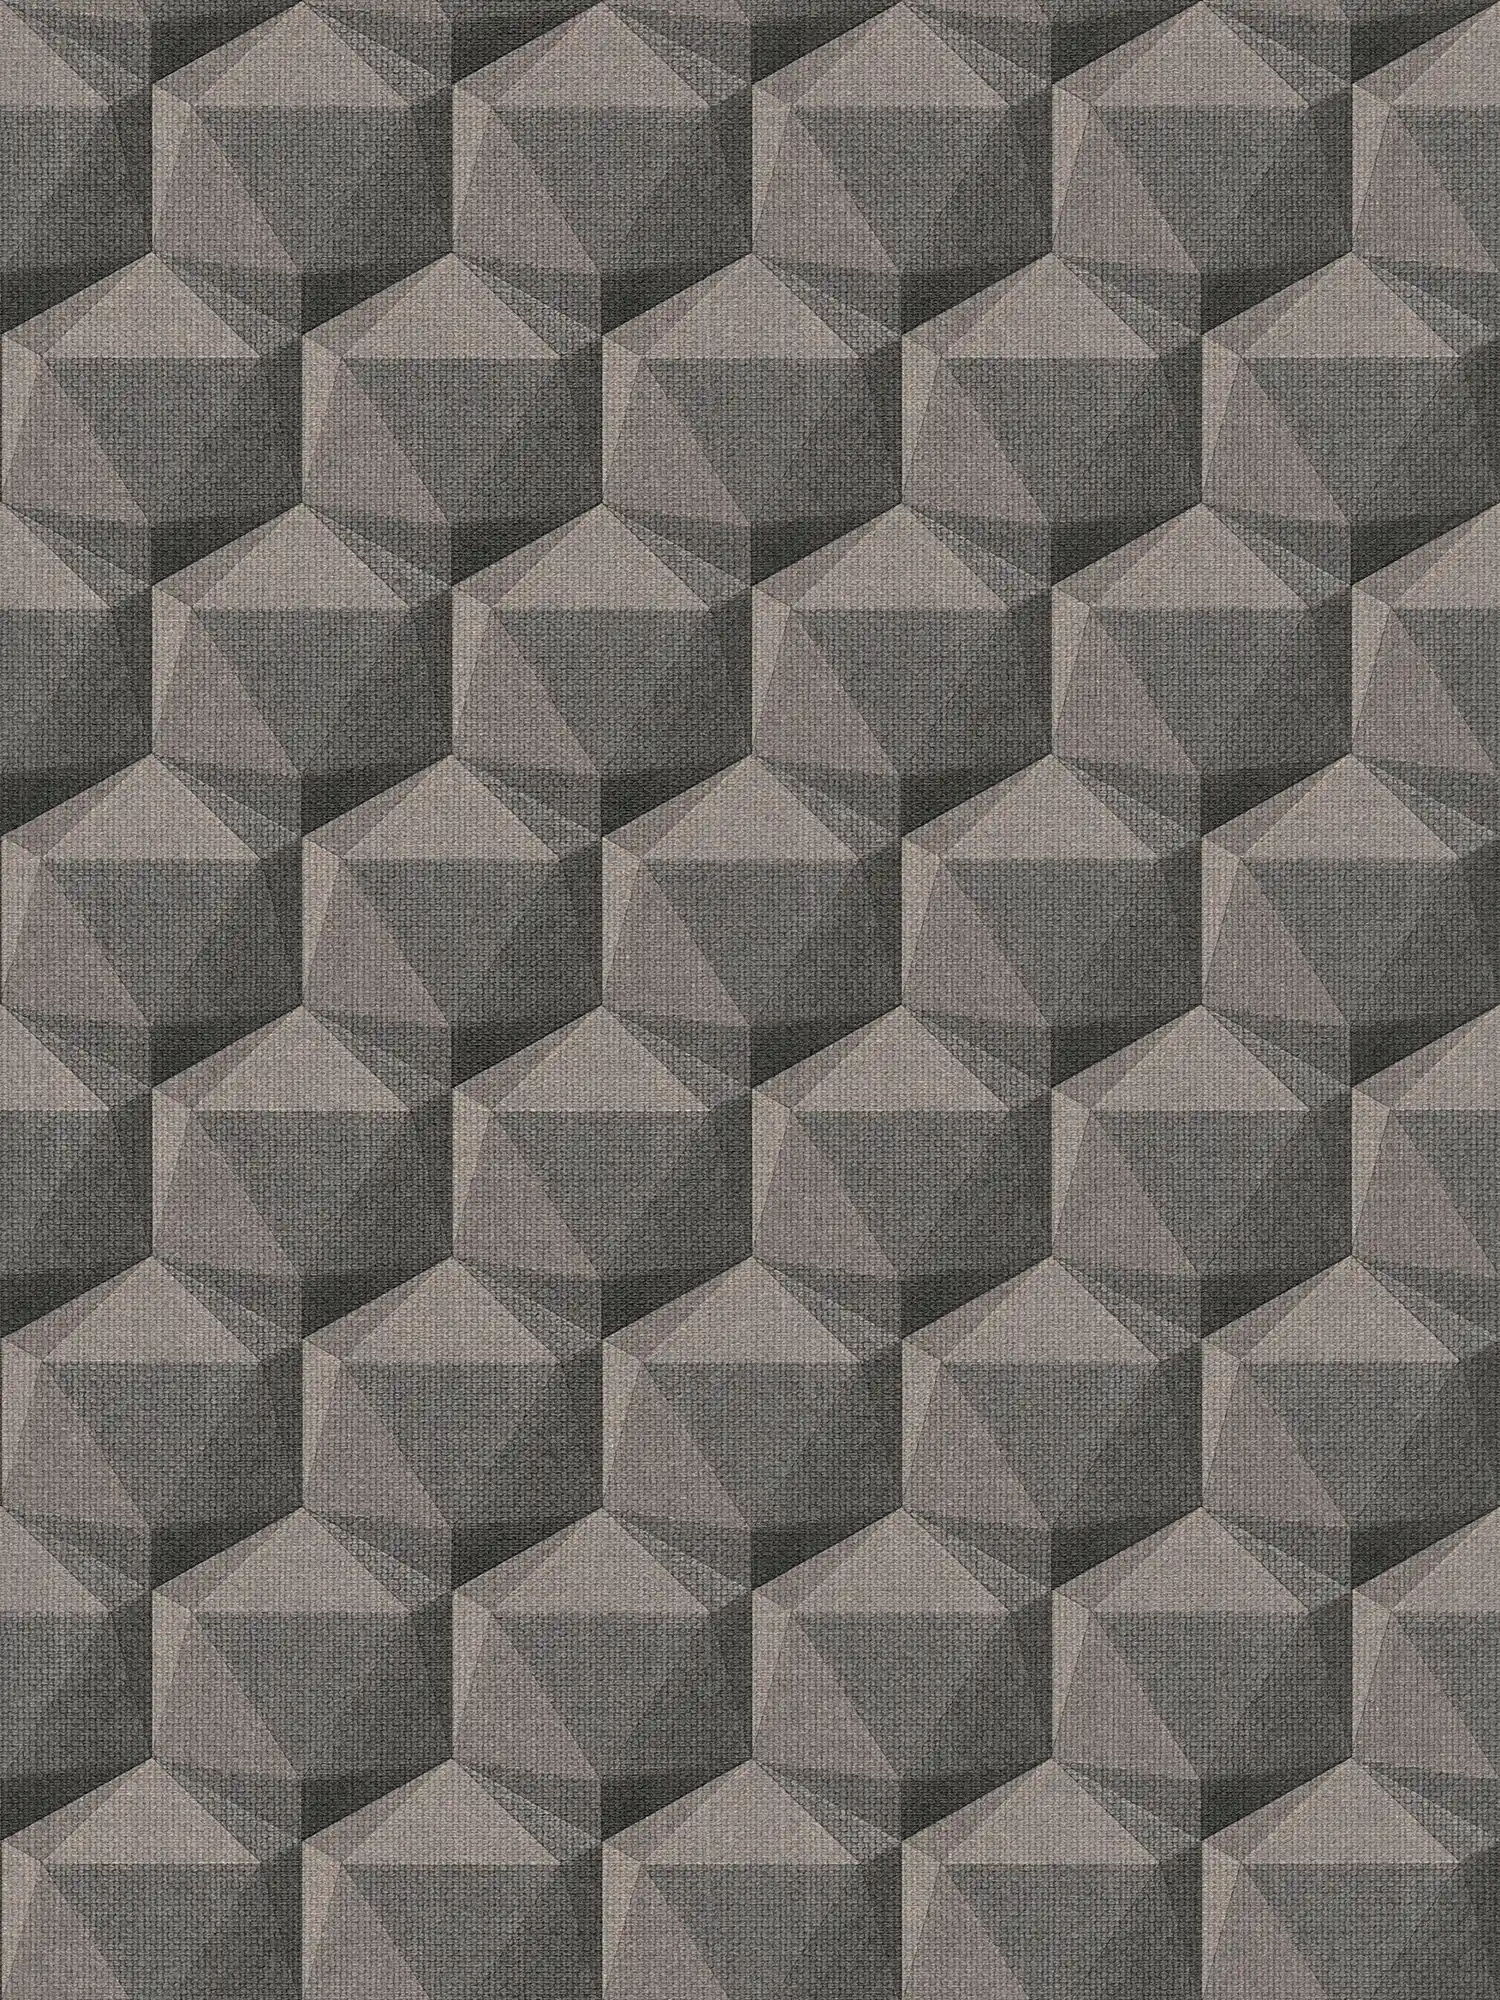 Graphic wallpaper 3D look with polygon pattern - grey, beige, black
